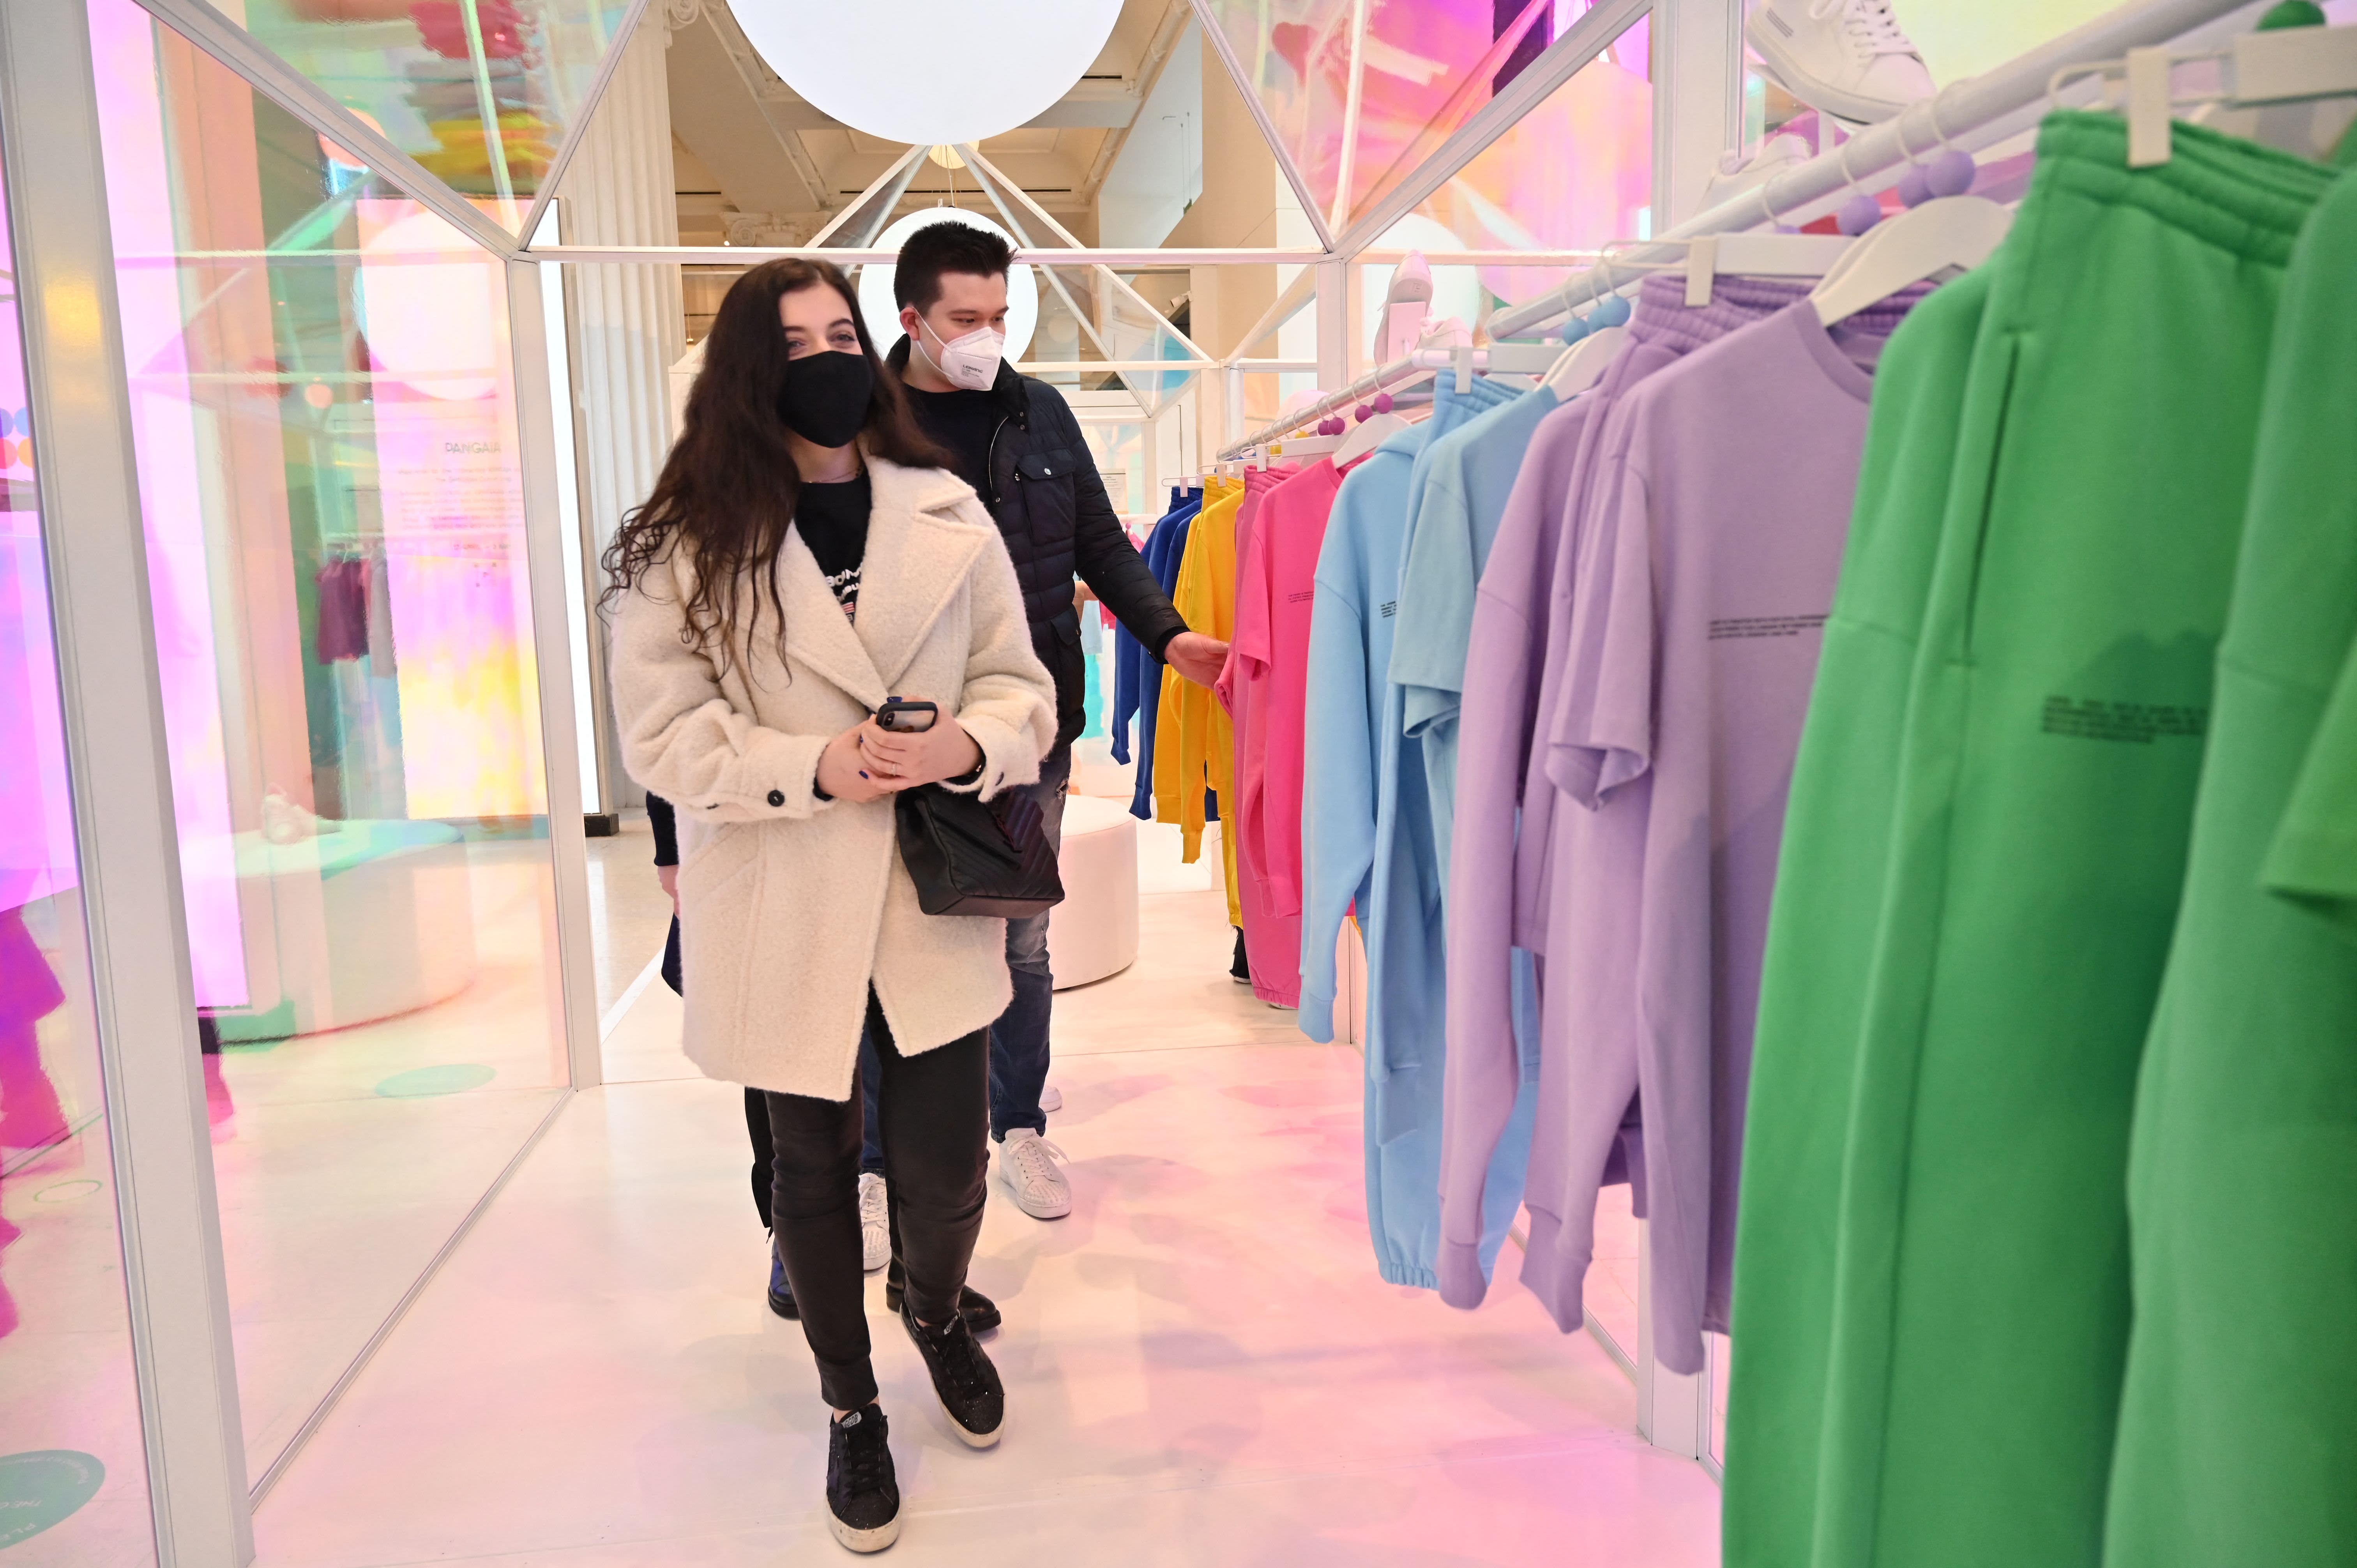 Experts see innovative stores and pop-ups